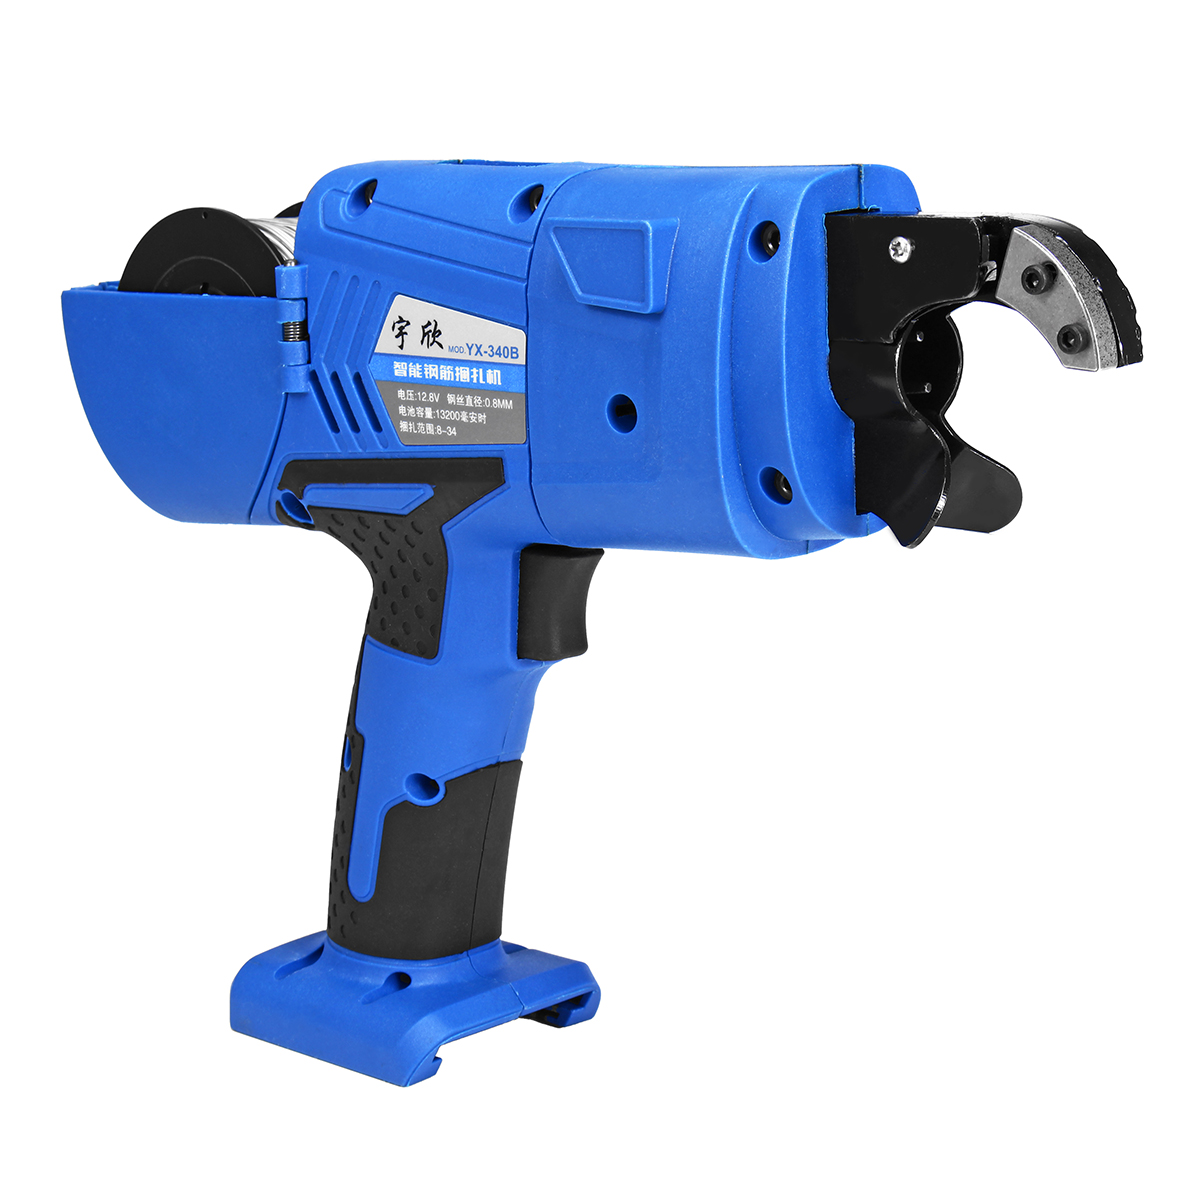 128V-Automatic-Rebar-Tying-Machine-Rebar-Tier-Tool-Strapping-8mm-34mm-Wrench-1306353